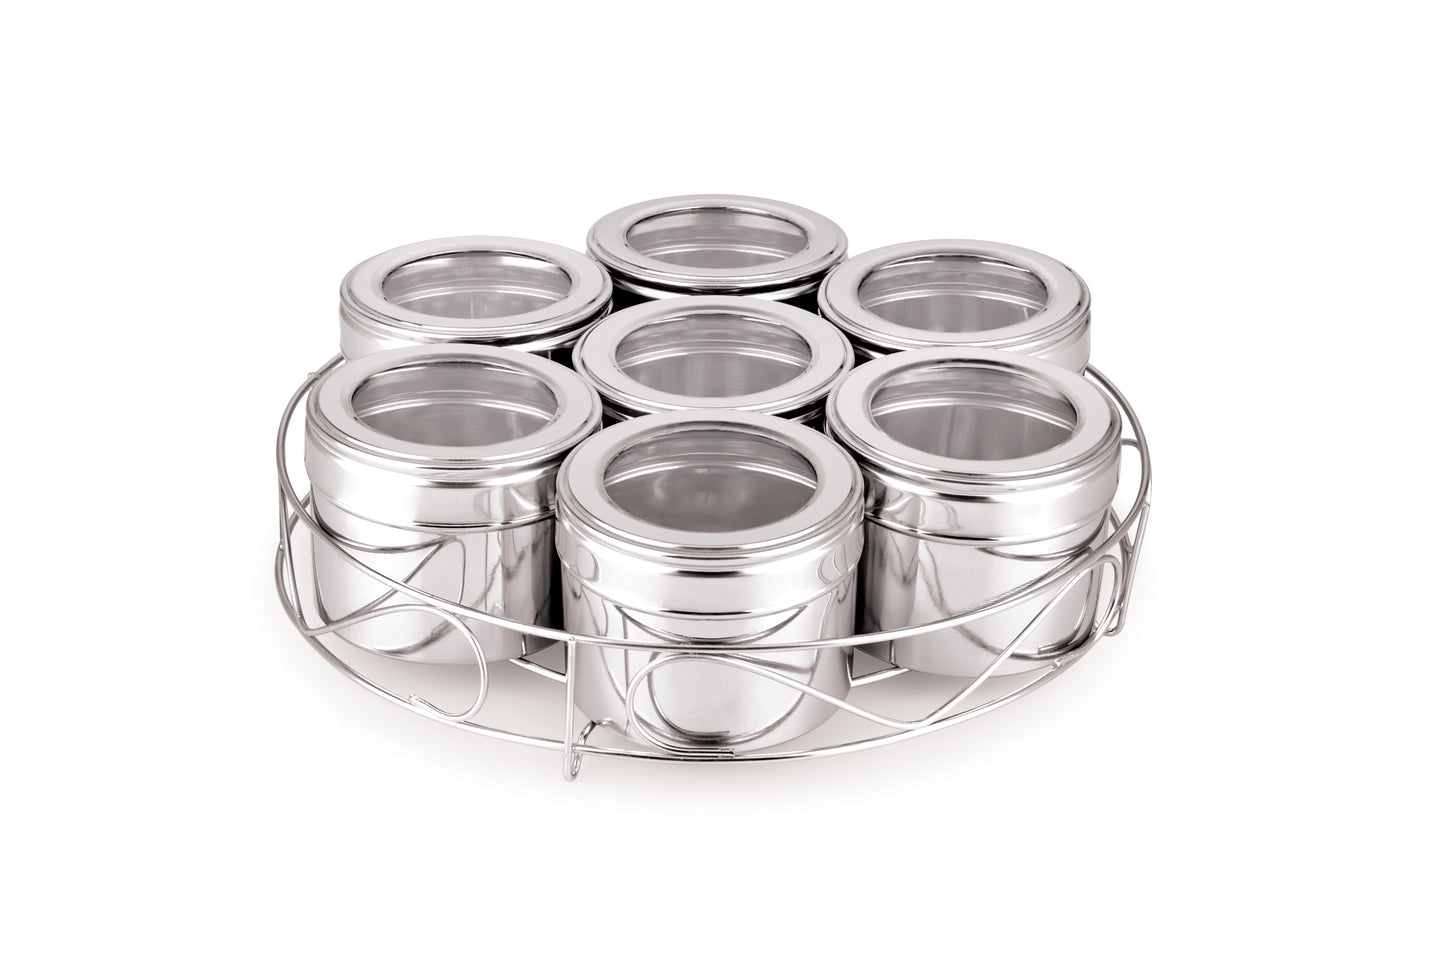 NATULIX Stainless Steel Multipurpose Kitchen Containers | Dry fruit Stand with See Through Lid and 7 small Spoons - 400ml each